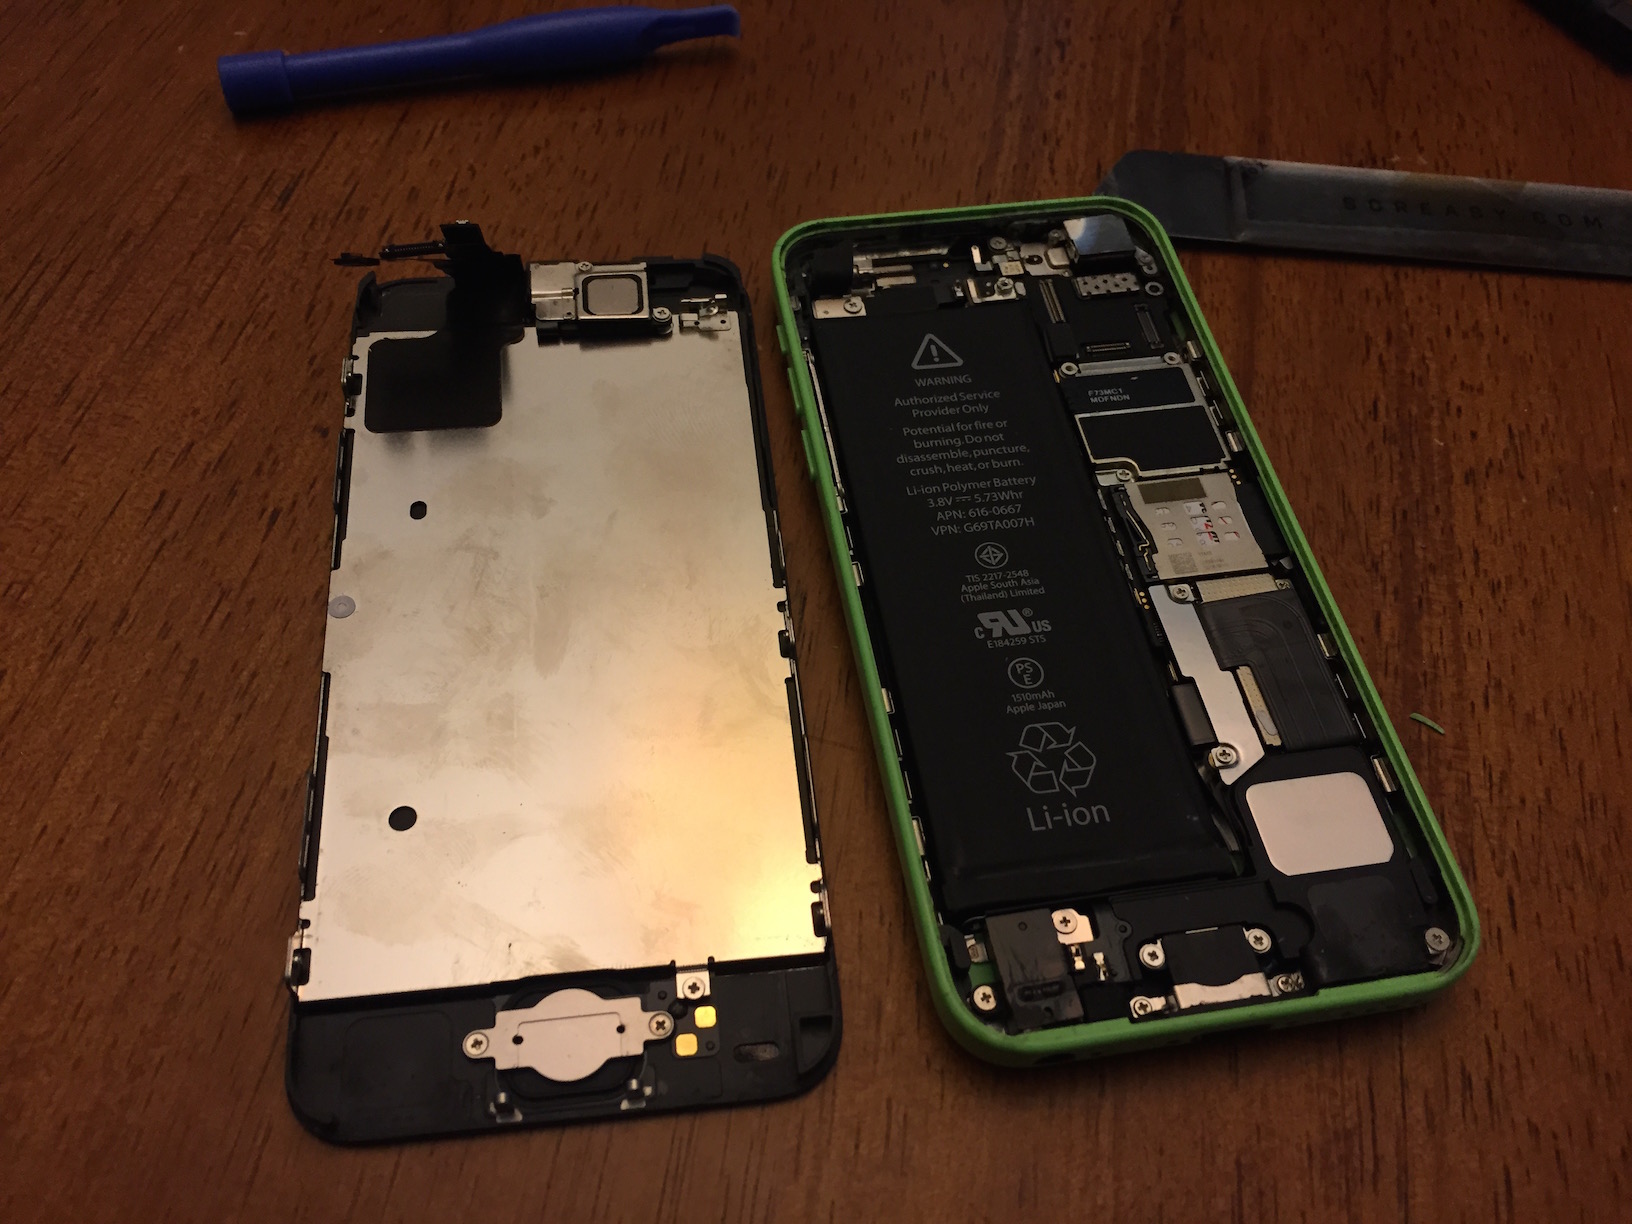 Iphone 5 Battery Down Completely, Iphone, Wiring Diagram ...